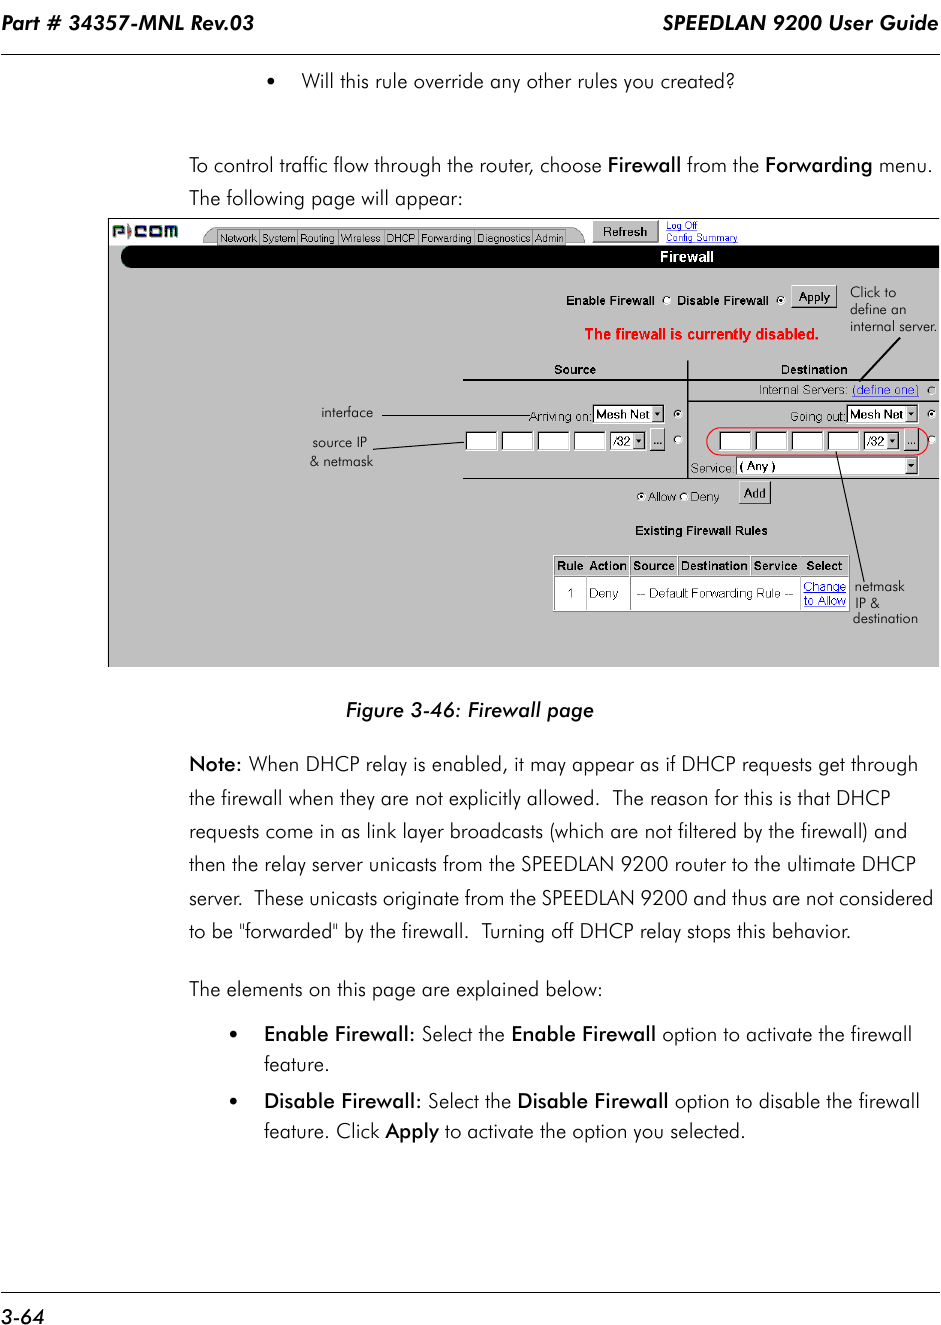 Part # 34357-MNL Rev.03                                                                   SPEEDLAN 9200 User Guide 3-64•Will this rule override any other rules you created?  To control traffic flow through the router, choose Firewall from the Forwarding menu. The following page will appear:Figure 3-46: Firewall pageNote: When DHCP relay is enabled, it may appear as if DHCP requests get through the firewall when they are not explicitly allowed.  The reason for this is that DHCP requests come in as link layer broadcasts (which are not filtered by the firewall) and then the relay server unicasts from the SPEEDLAN 9200 router to the ultimate DHCP server.  These unicasts originate from the SPEEDLAN 9200 and thus are not considered to be &quot;forwarded&quot; by the firewall.  Turning off DHCP relay stops this behavior.The elements on this page are explained below:•Enable Firewall: Select the Enable Firewall option to activate the firewall feature.•Disable Firewall: Select the Disable Firewall option to disable the firewall feature. Click Apply to activate the option you selected.interfacesource IPdestinationIP &amp; netmask&amp; netmaskClick to define an internal server.